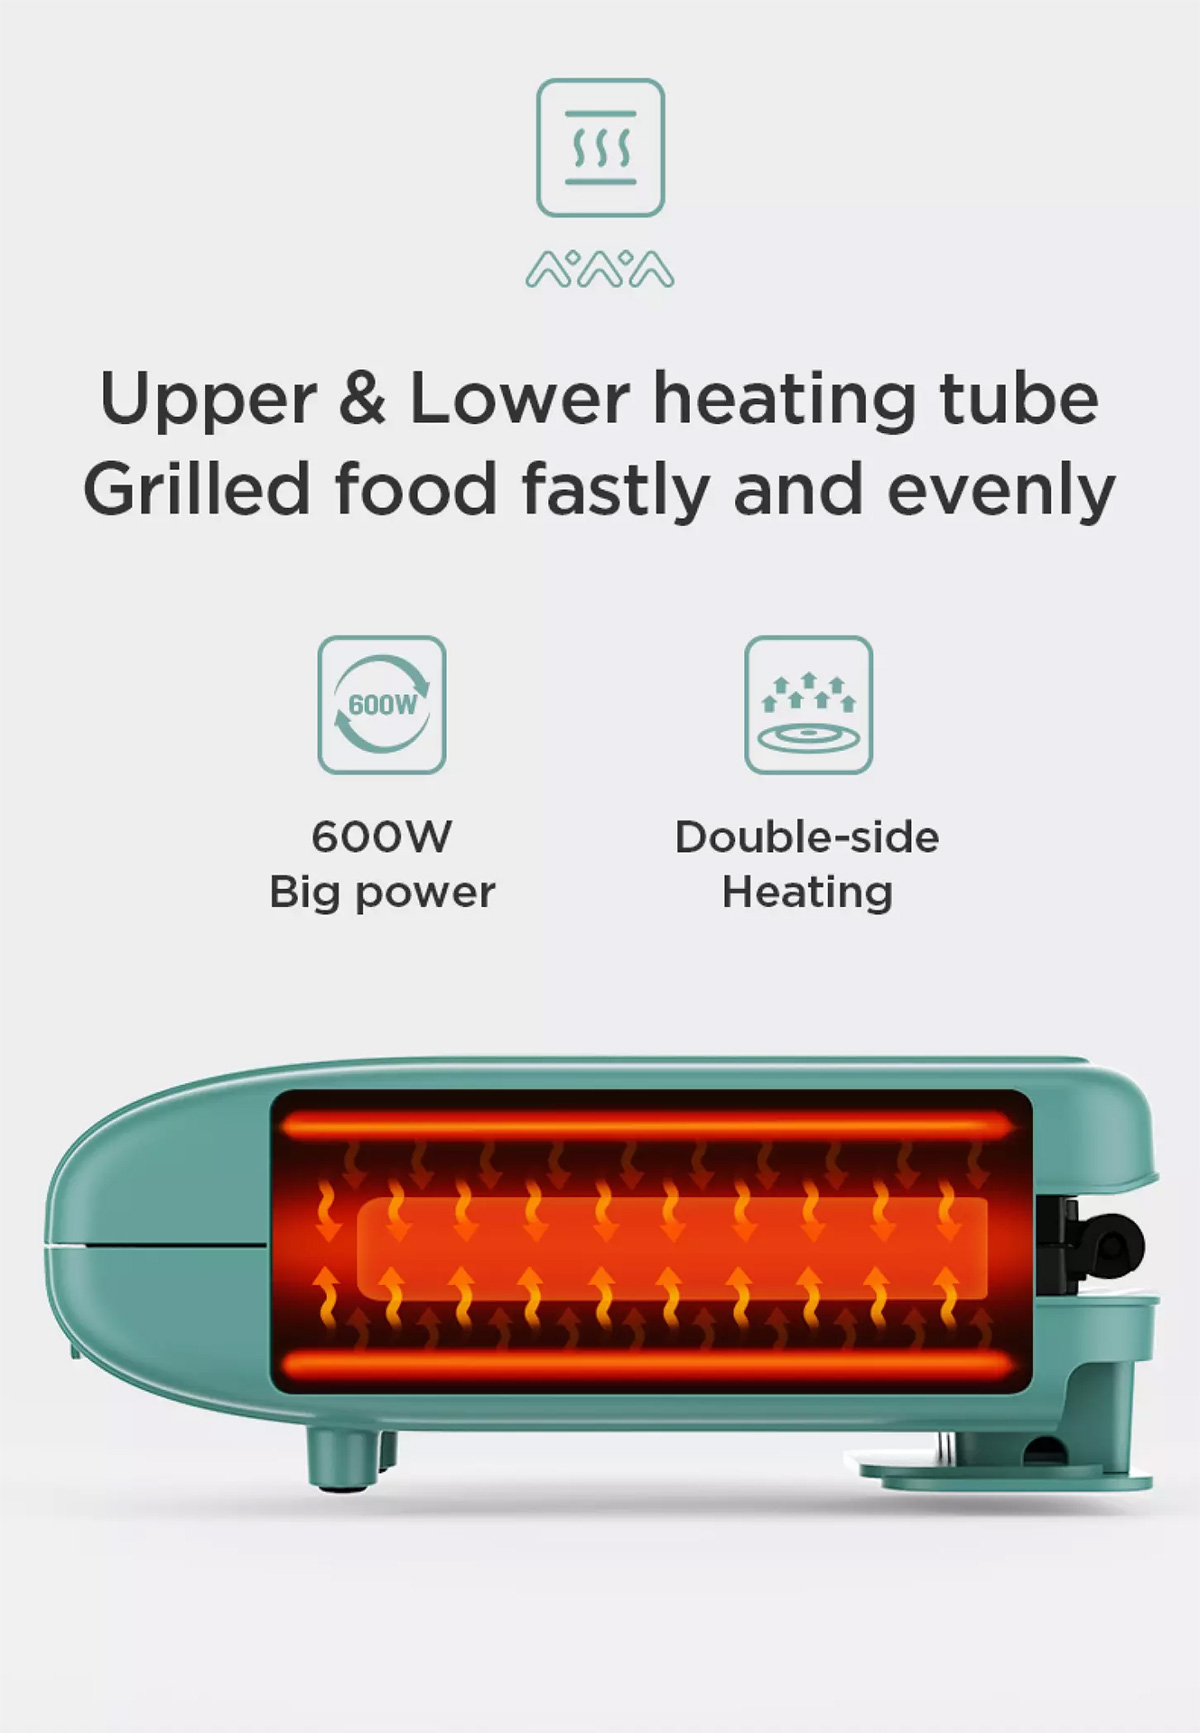 Upper & Lower heating tube Grilled food fastly and evenly